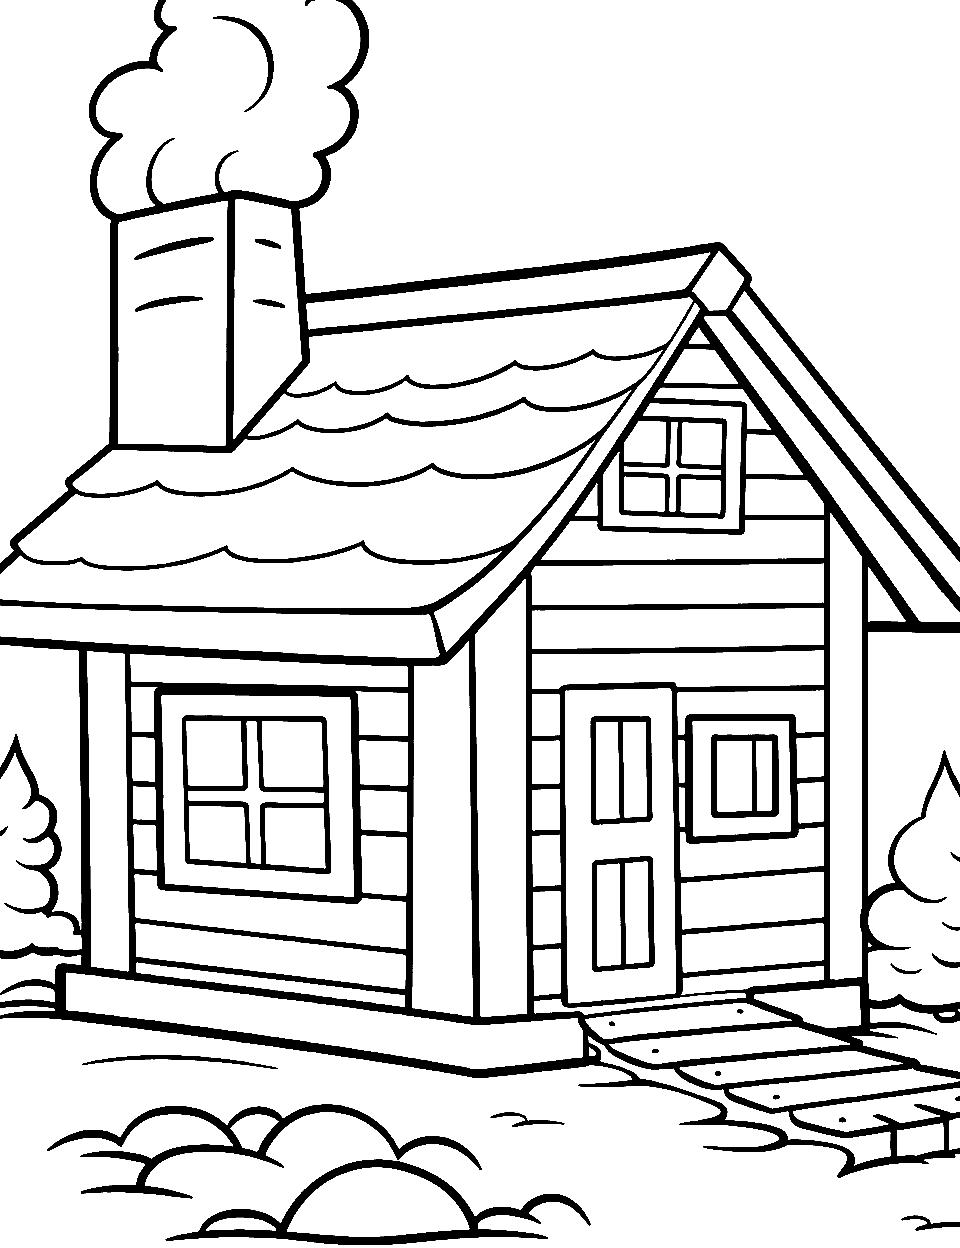 Rustic Log Cabin Coloring Page - A log cabin with smoke from the chimney.